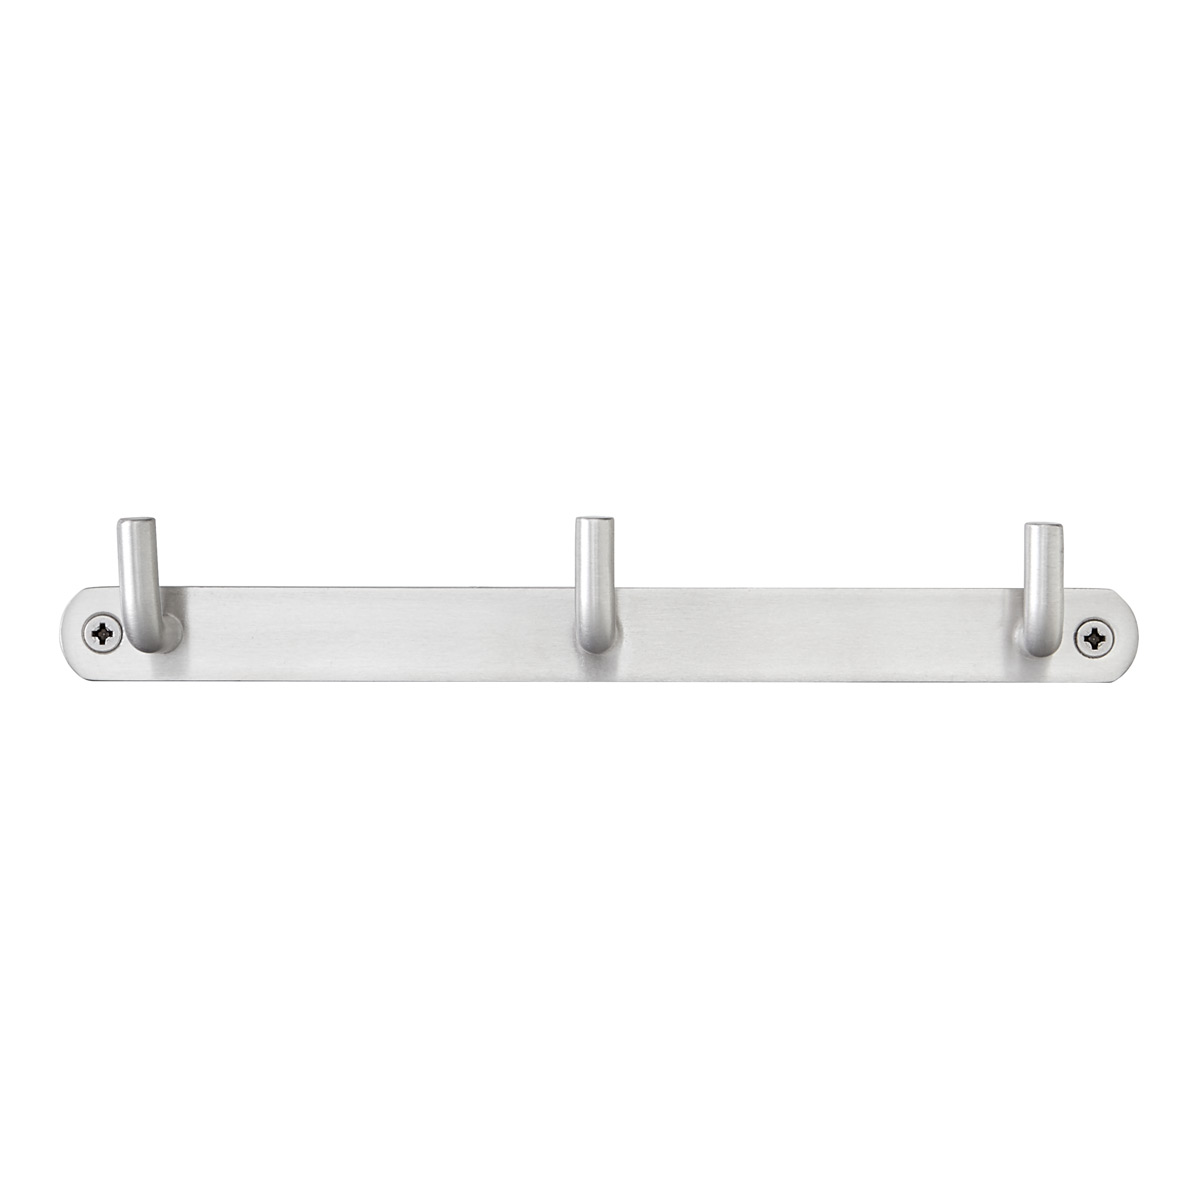 https://www.containerstore.com/catalogimages/313270/10007059Deco3HookRackStainless_1200.jpg